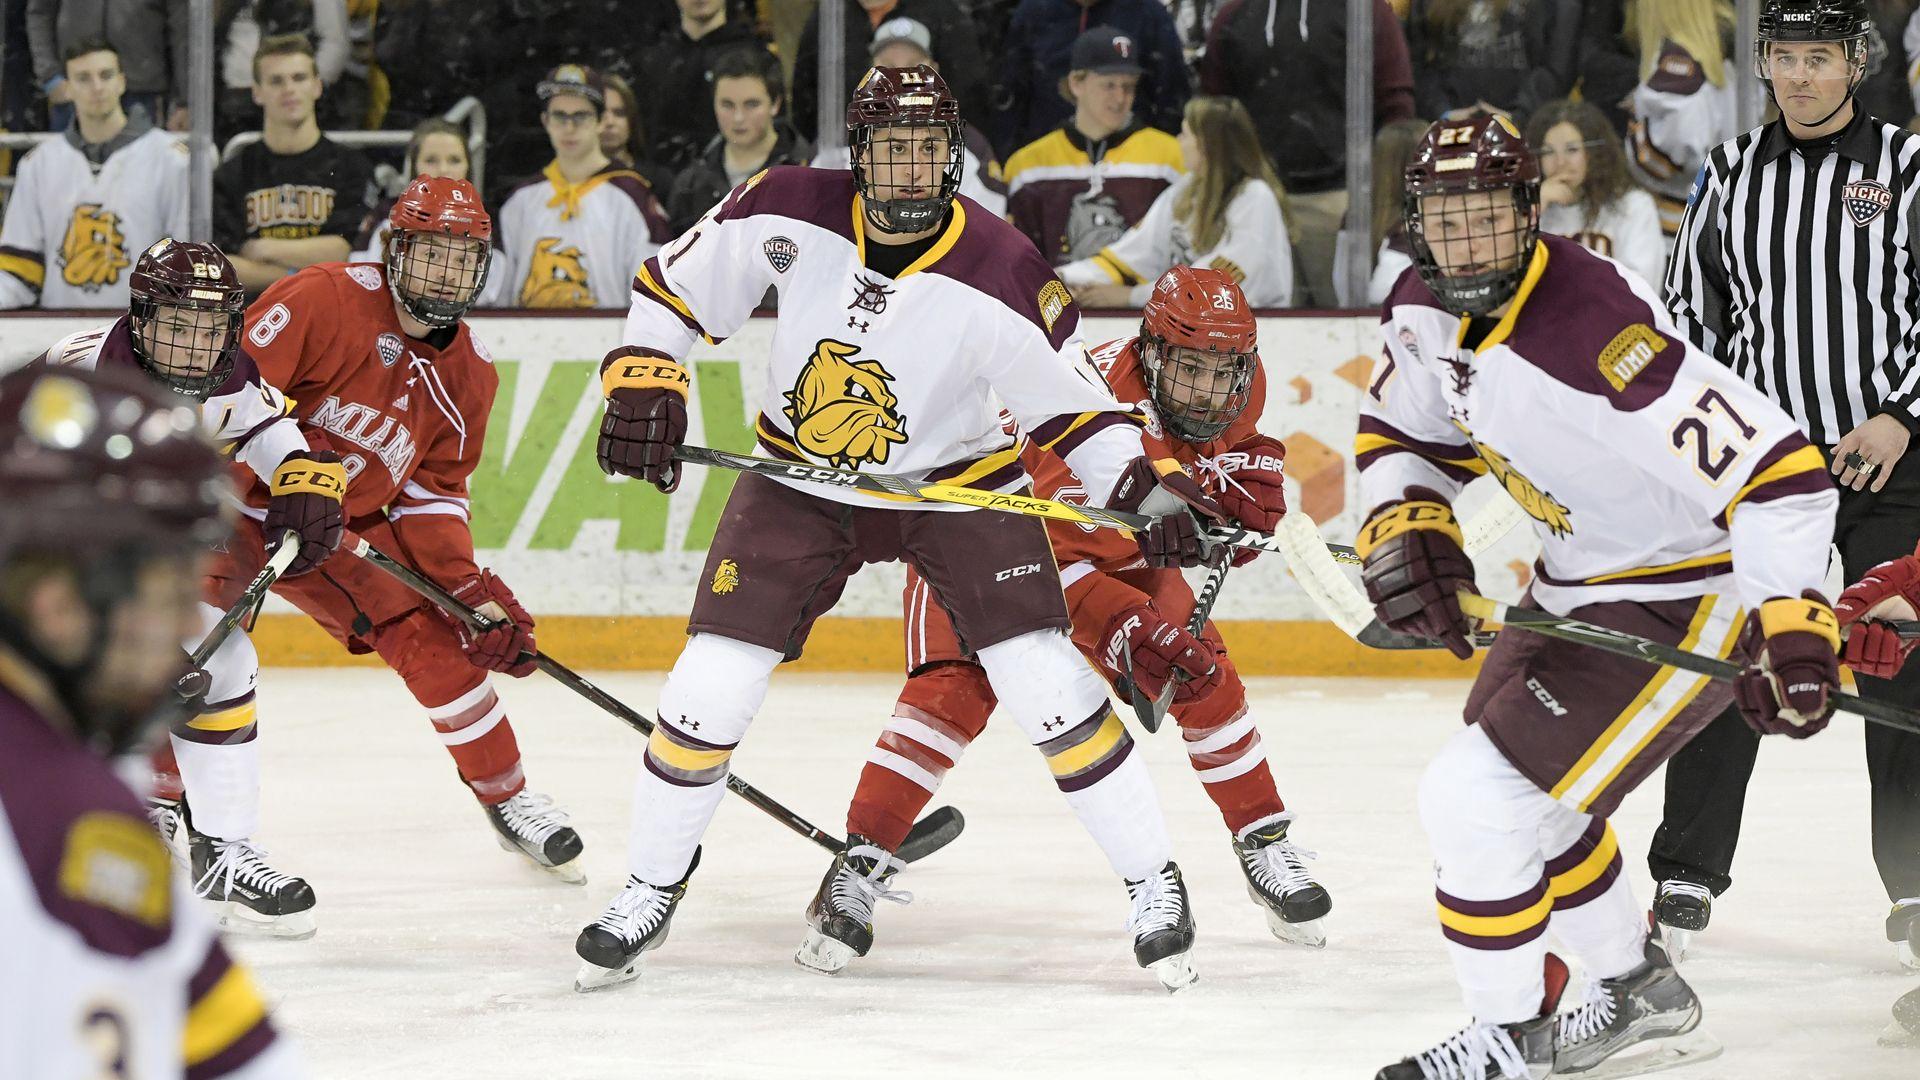 WEEKEND NCHC SERIES AT MIAMI NEXT UP FOR NO. 14 BULLDOGS